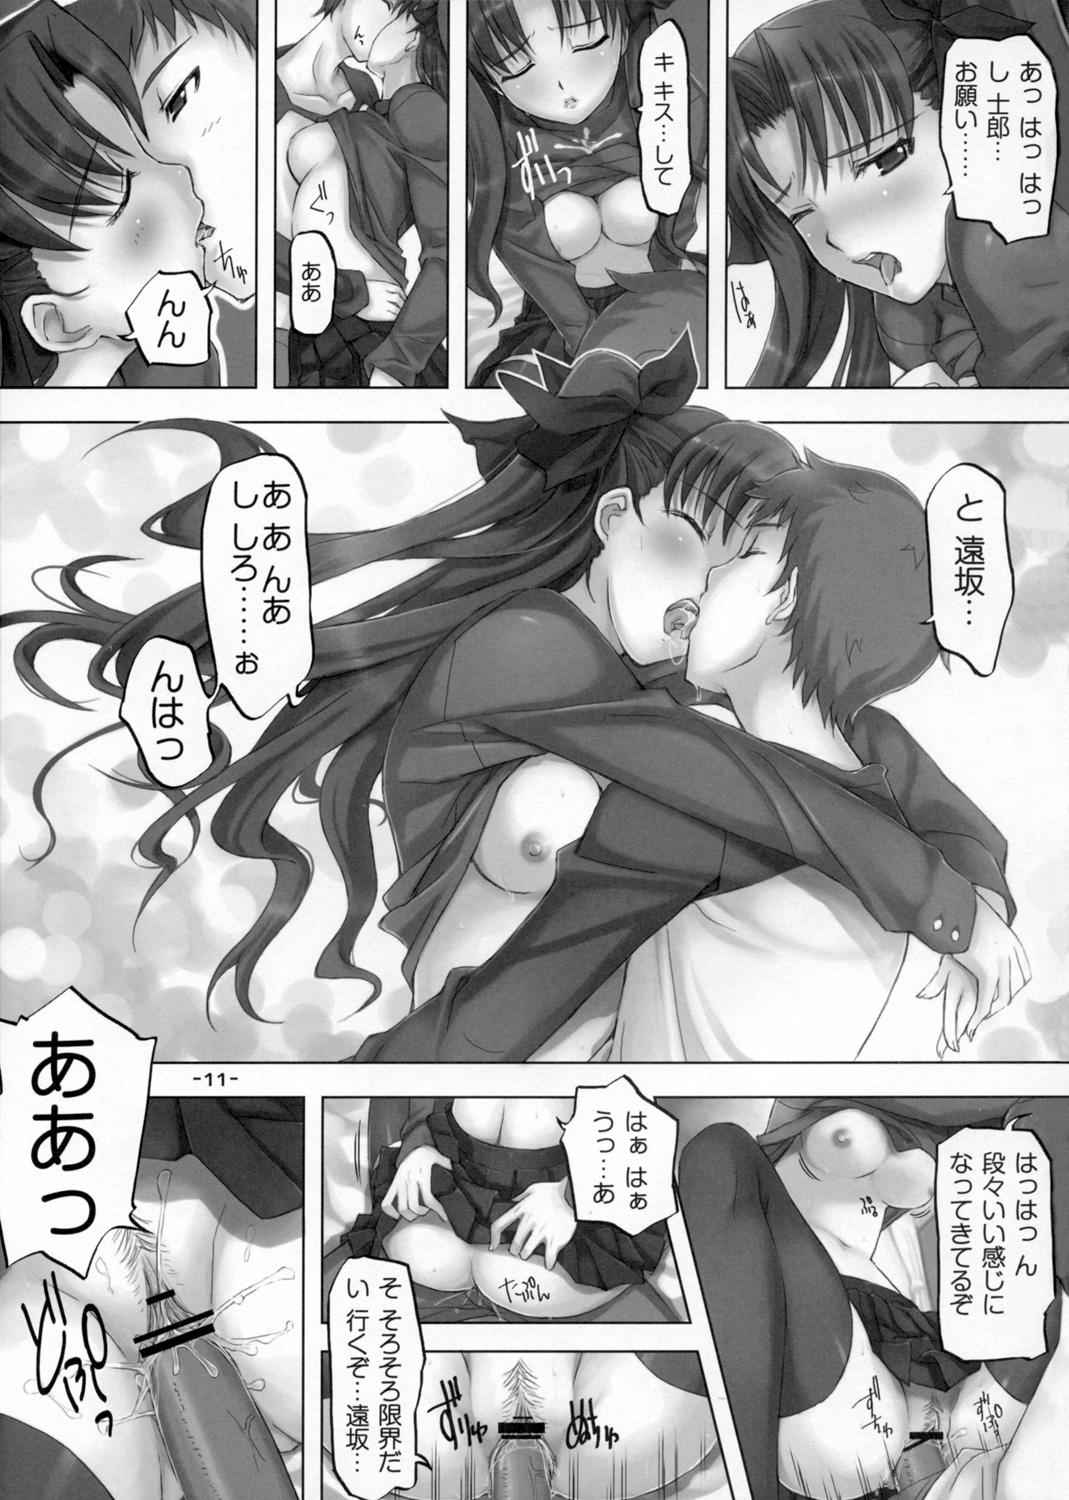 Denmark DAILY LIFE - Fate stay night Fate hollow ataraxia Gay 3some - Page 10